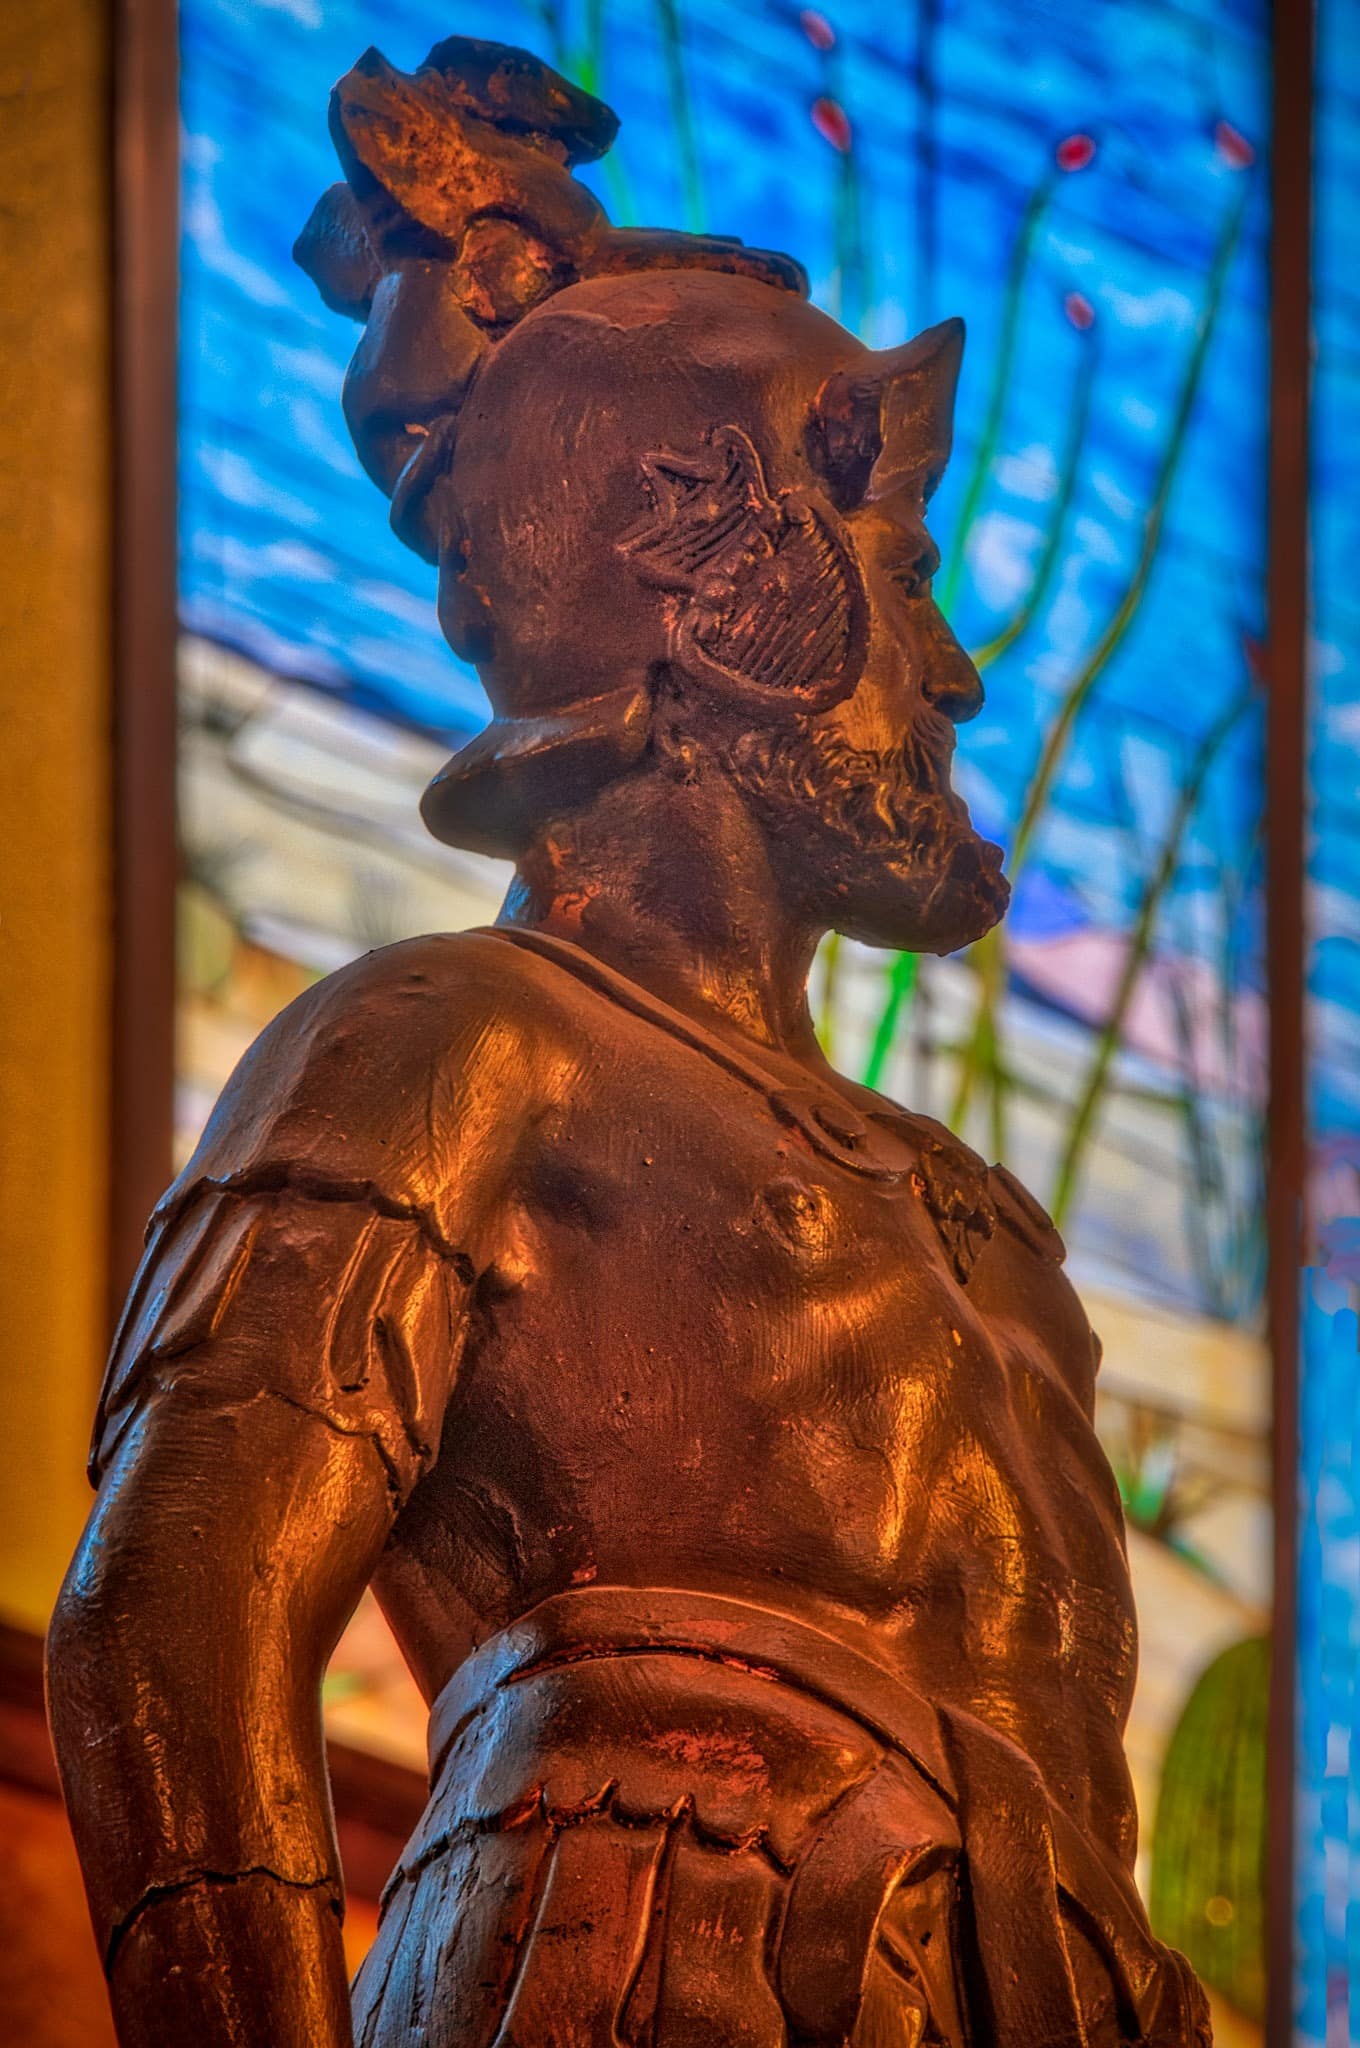 Close-up of a statue of a conquistador, in honor of the Gadsden Purchase, stands next to the grand staircase in the lobby of the Gadsden Hotel in Douglas, Arizona.